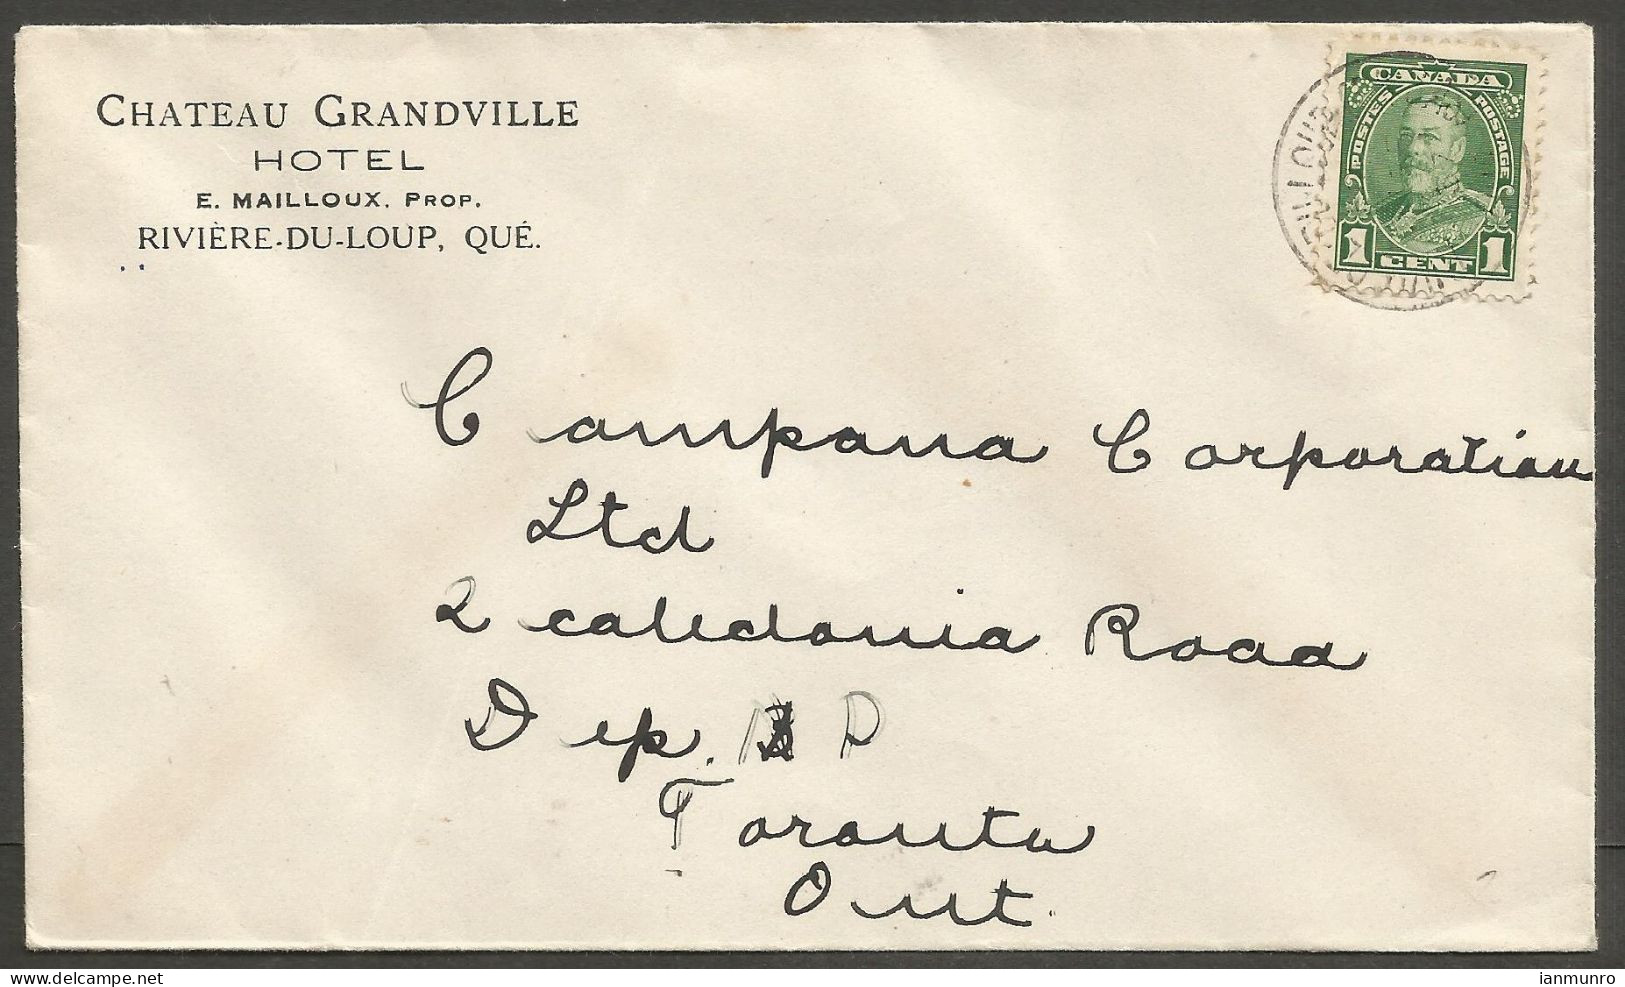 1937 Chateau Grandville Hotel Advertising Cover 1c CDS Riviere Du Loup PQ Quebec - Postal History